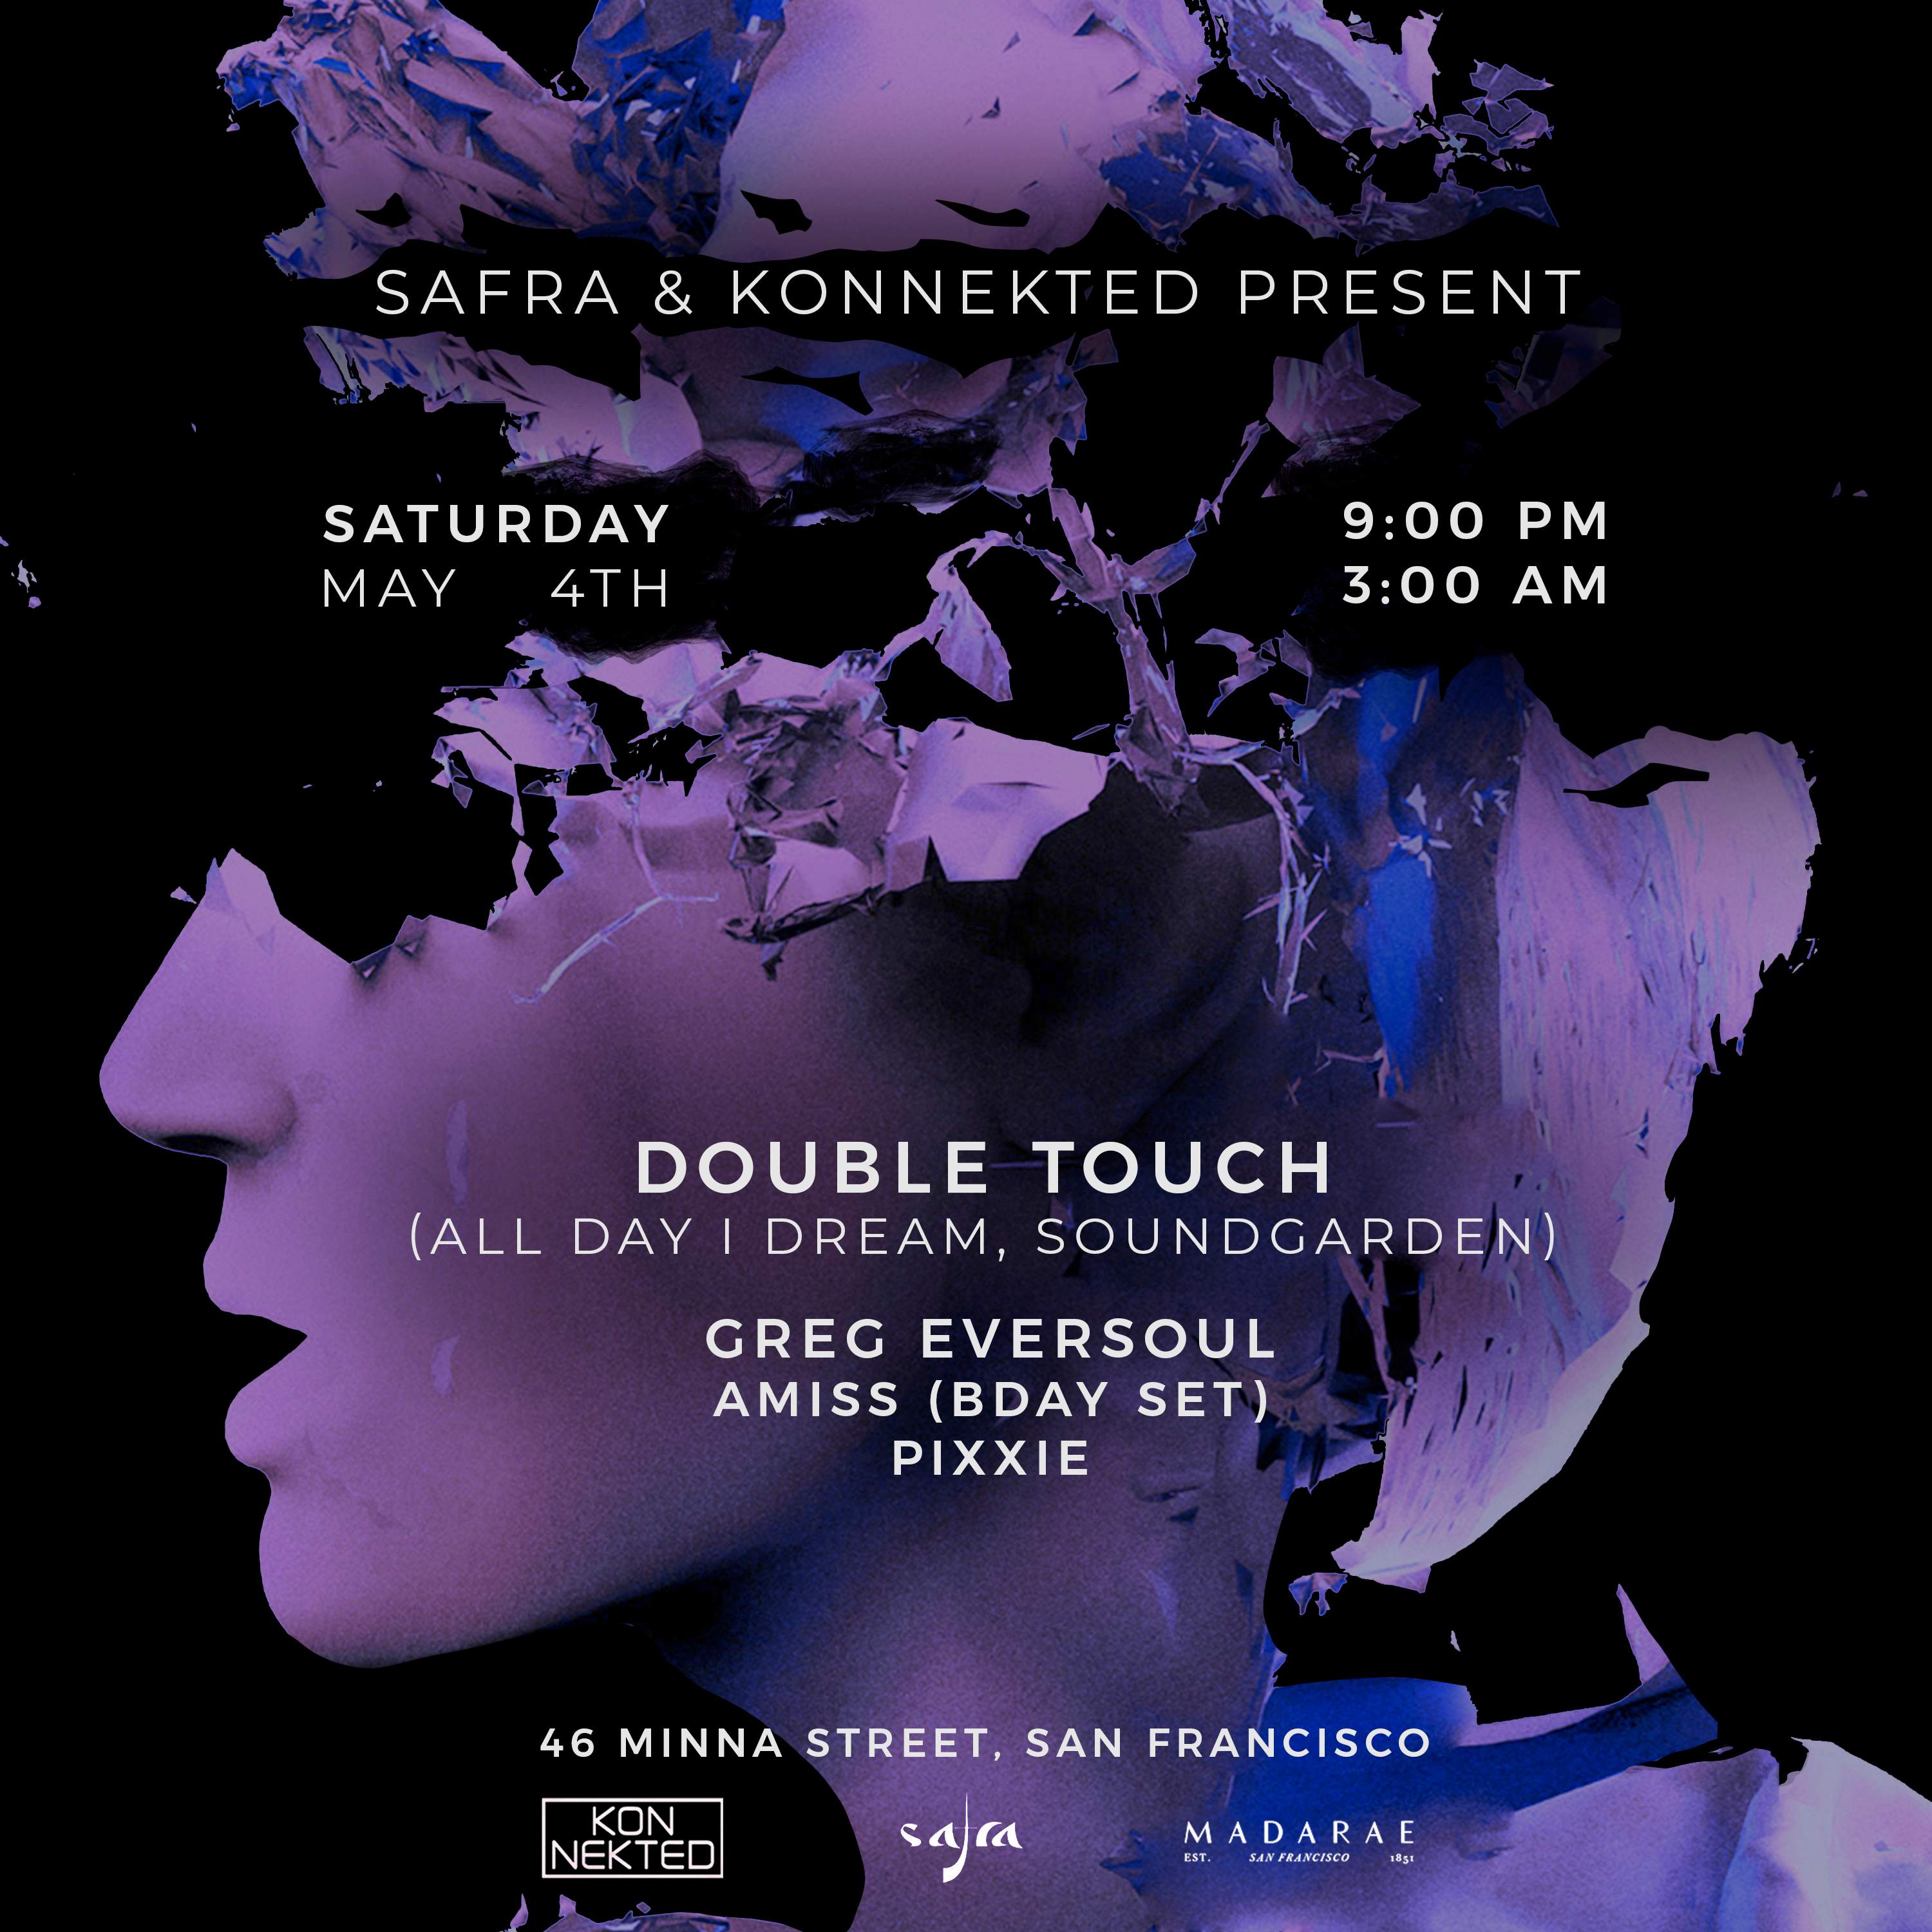 Safra & Konnekted present Double Touch (All Day I Dream) - フライヤー表